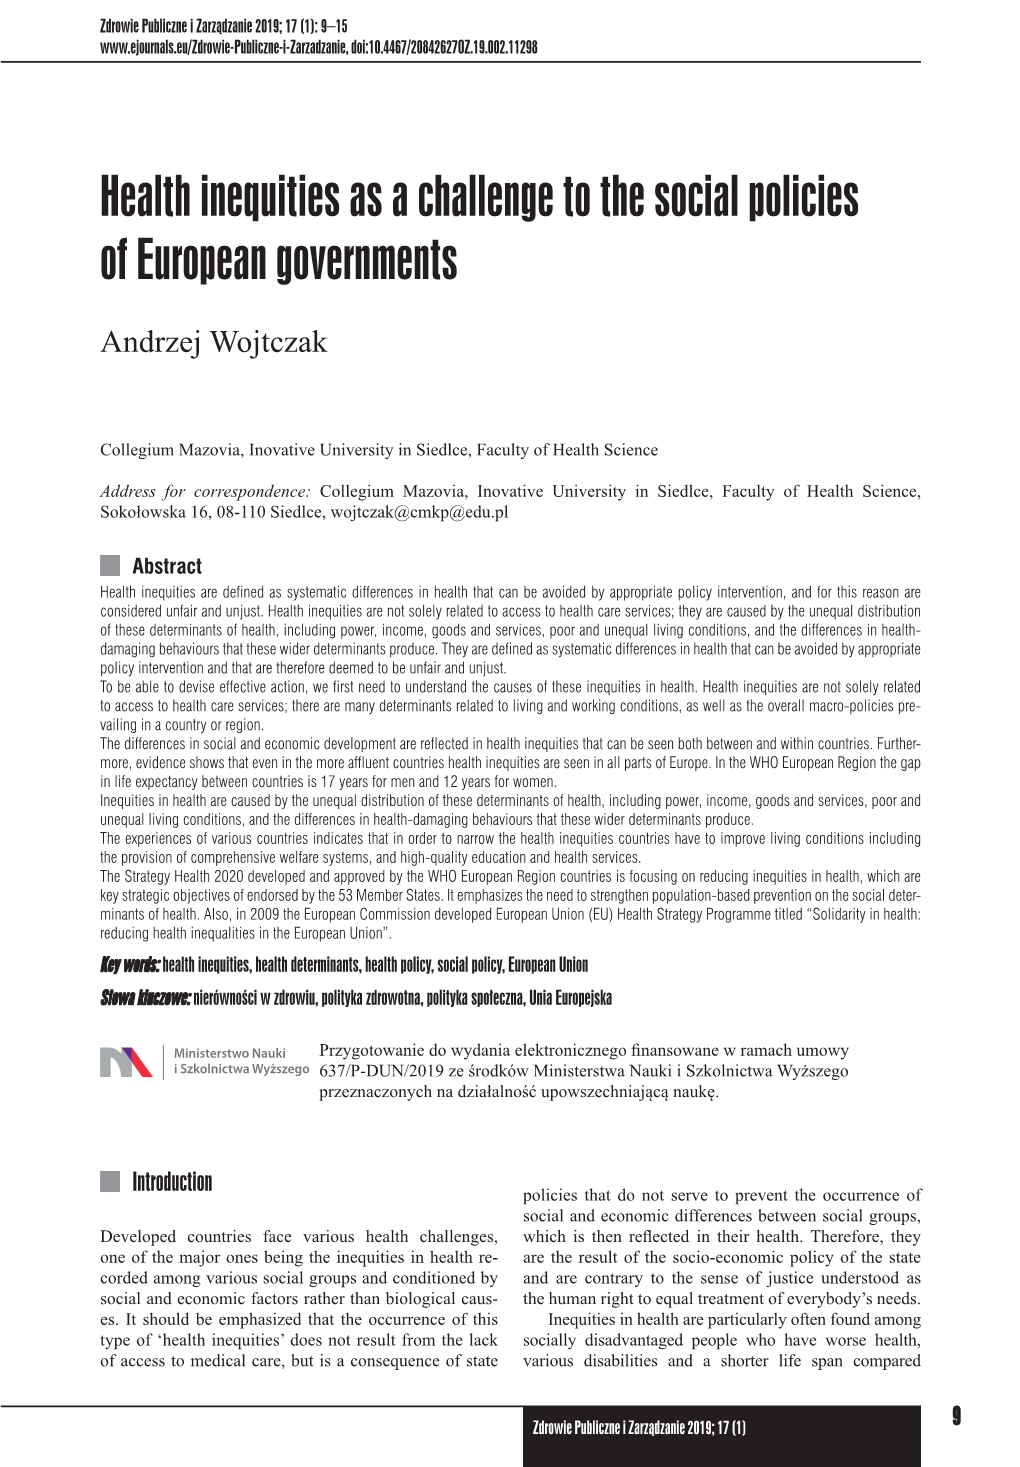 Health Inequities As a Challenge to the Social Policies of European Governments